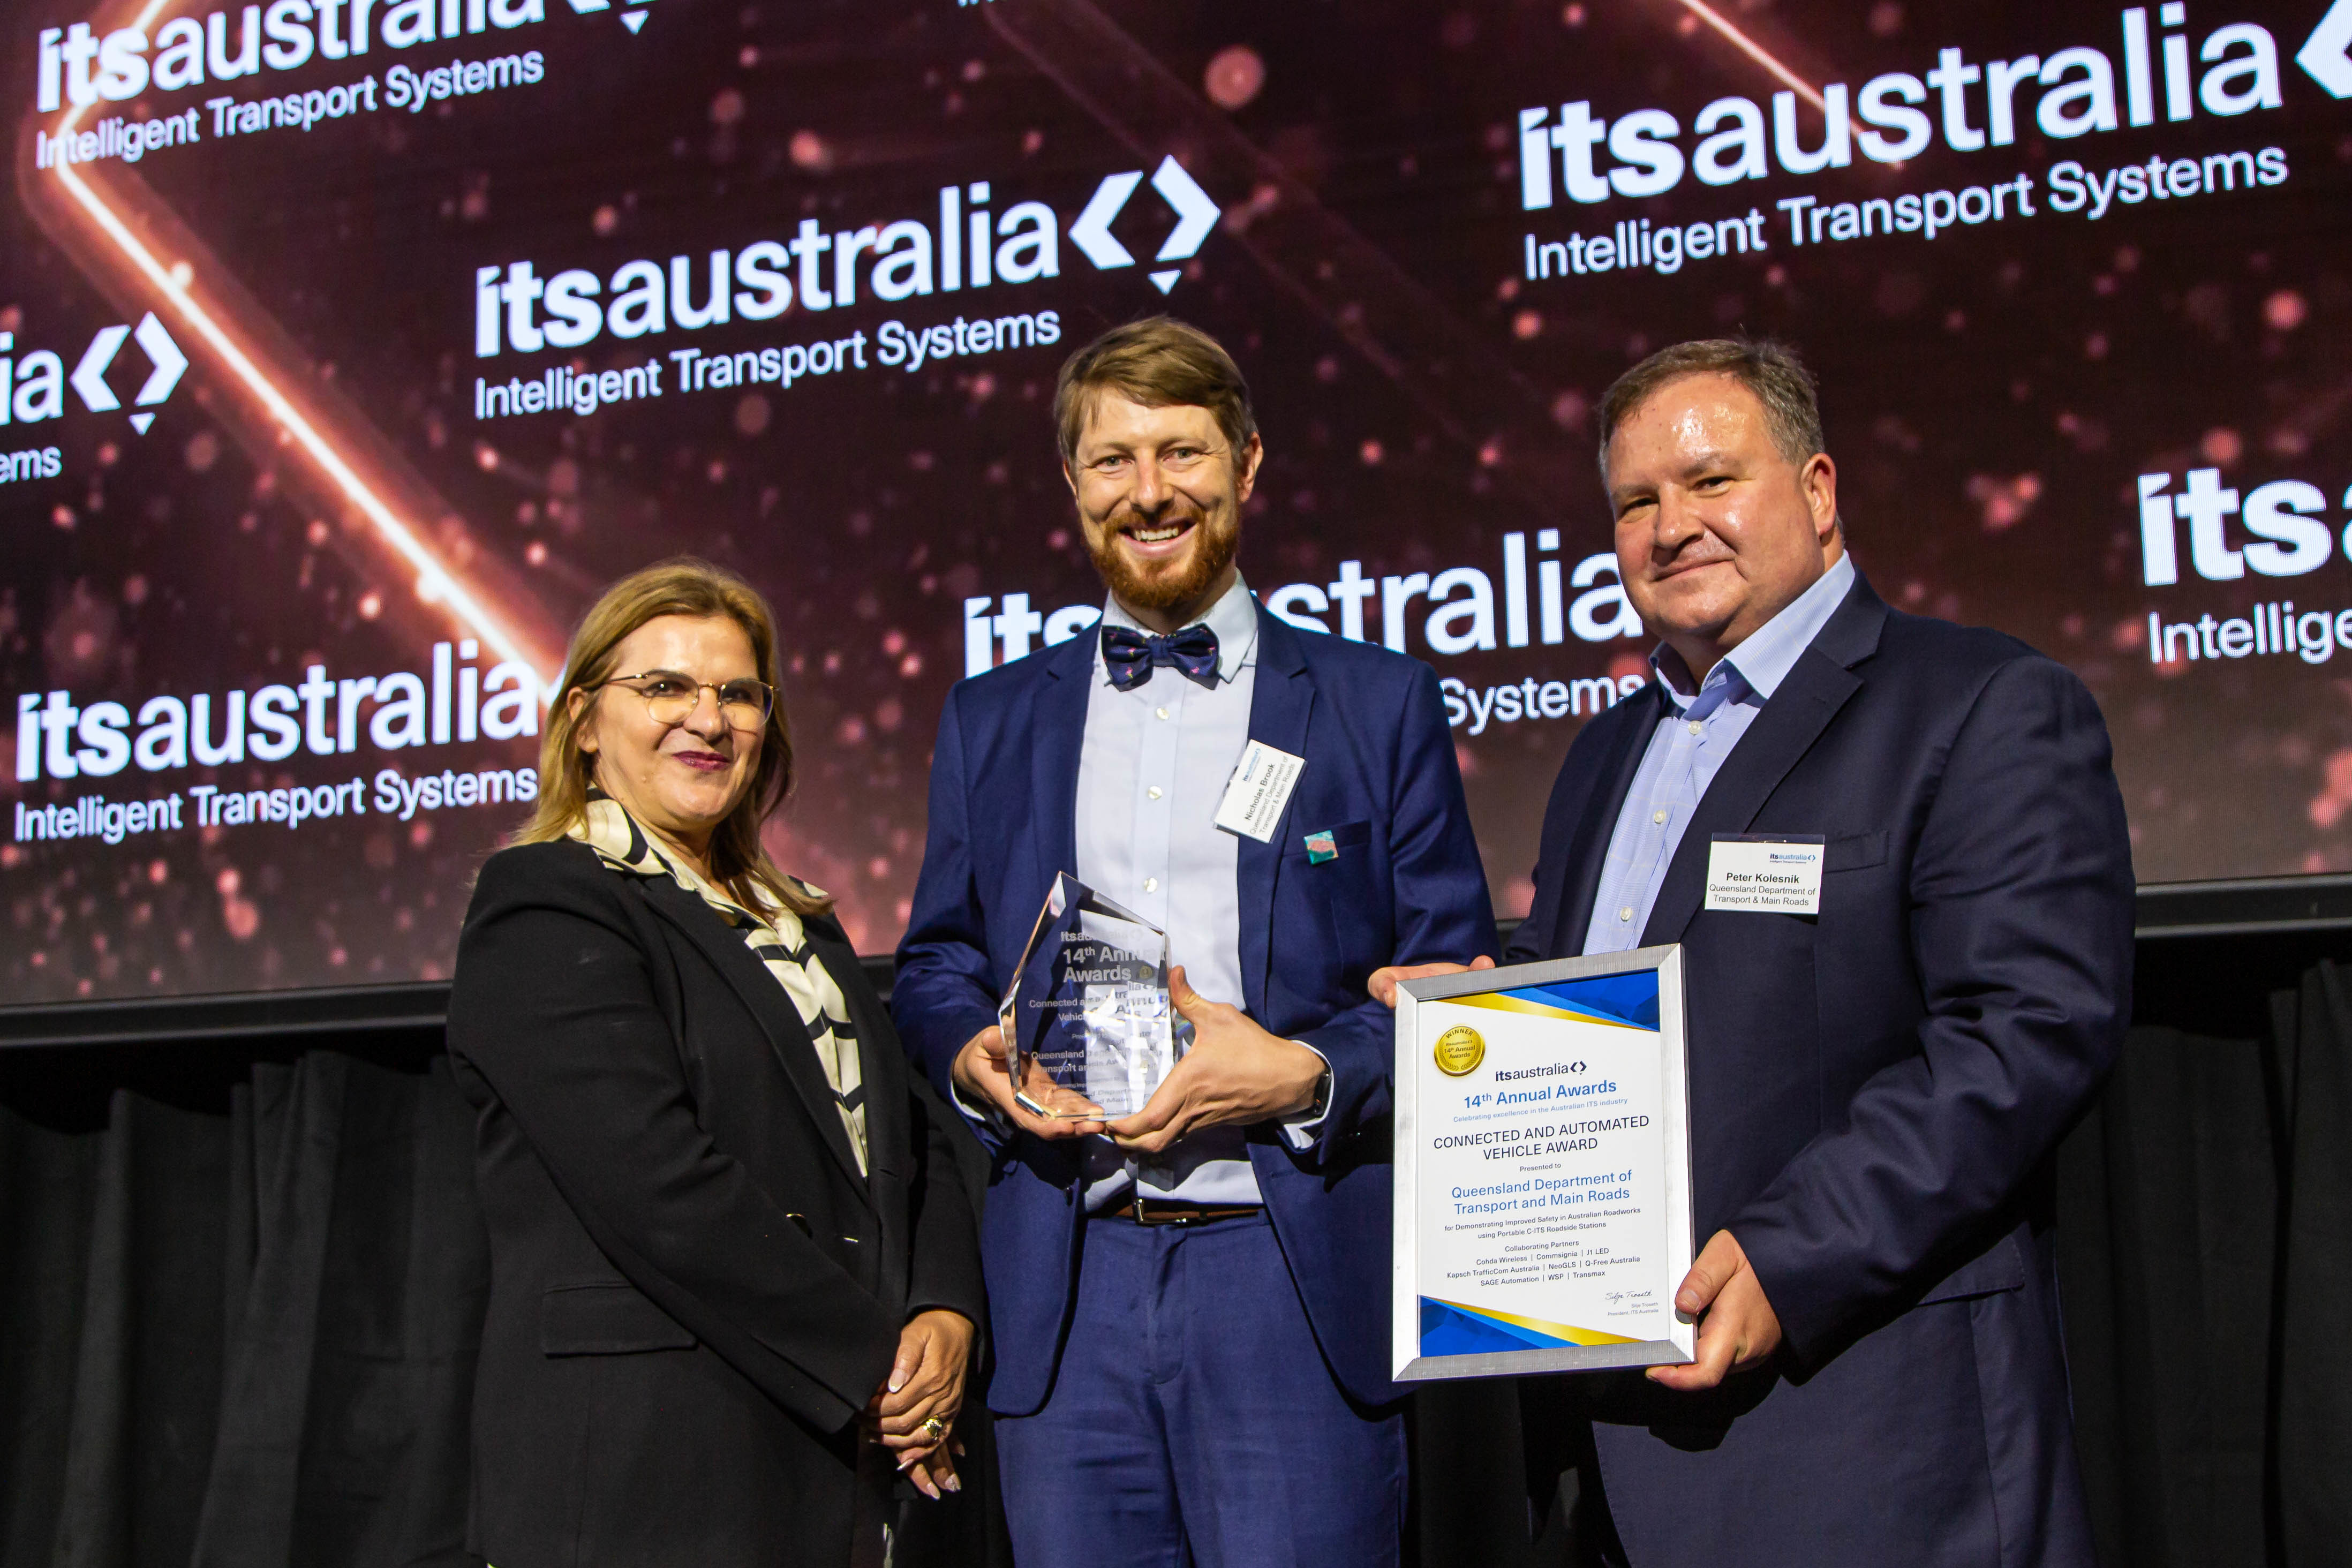 Nicholas Brook and Peter Kolesnik from Qld Department of Transport and Main Roads accepting the Connected and Automated Vehicle Award from Rita Excel, AWS and ITS Australia Board Member